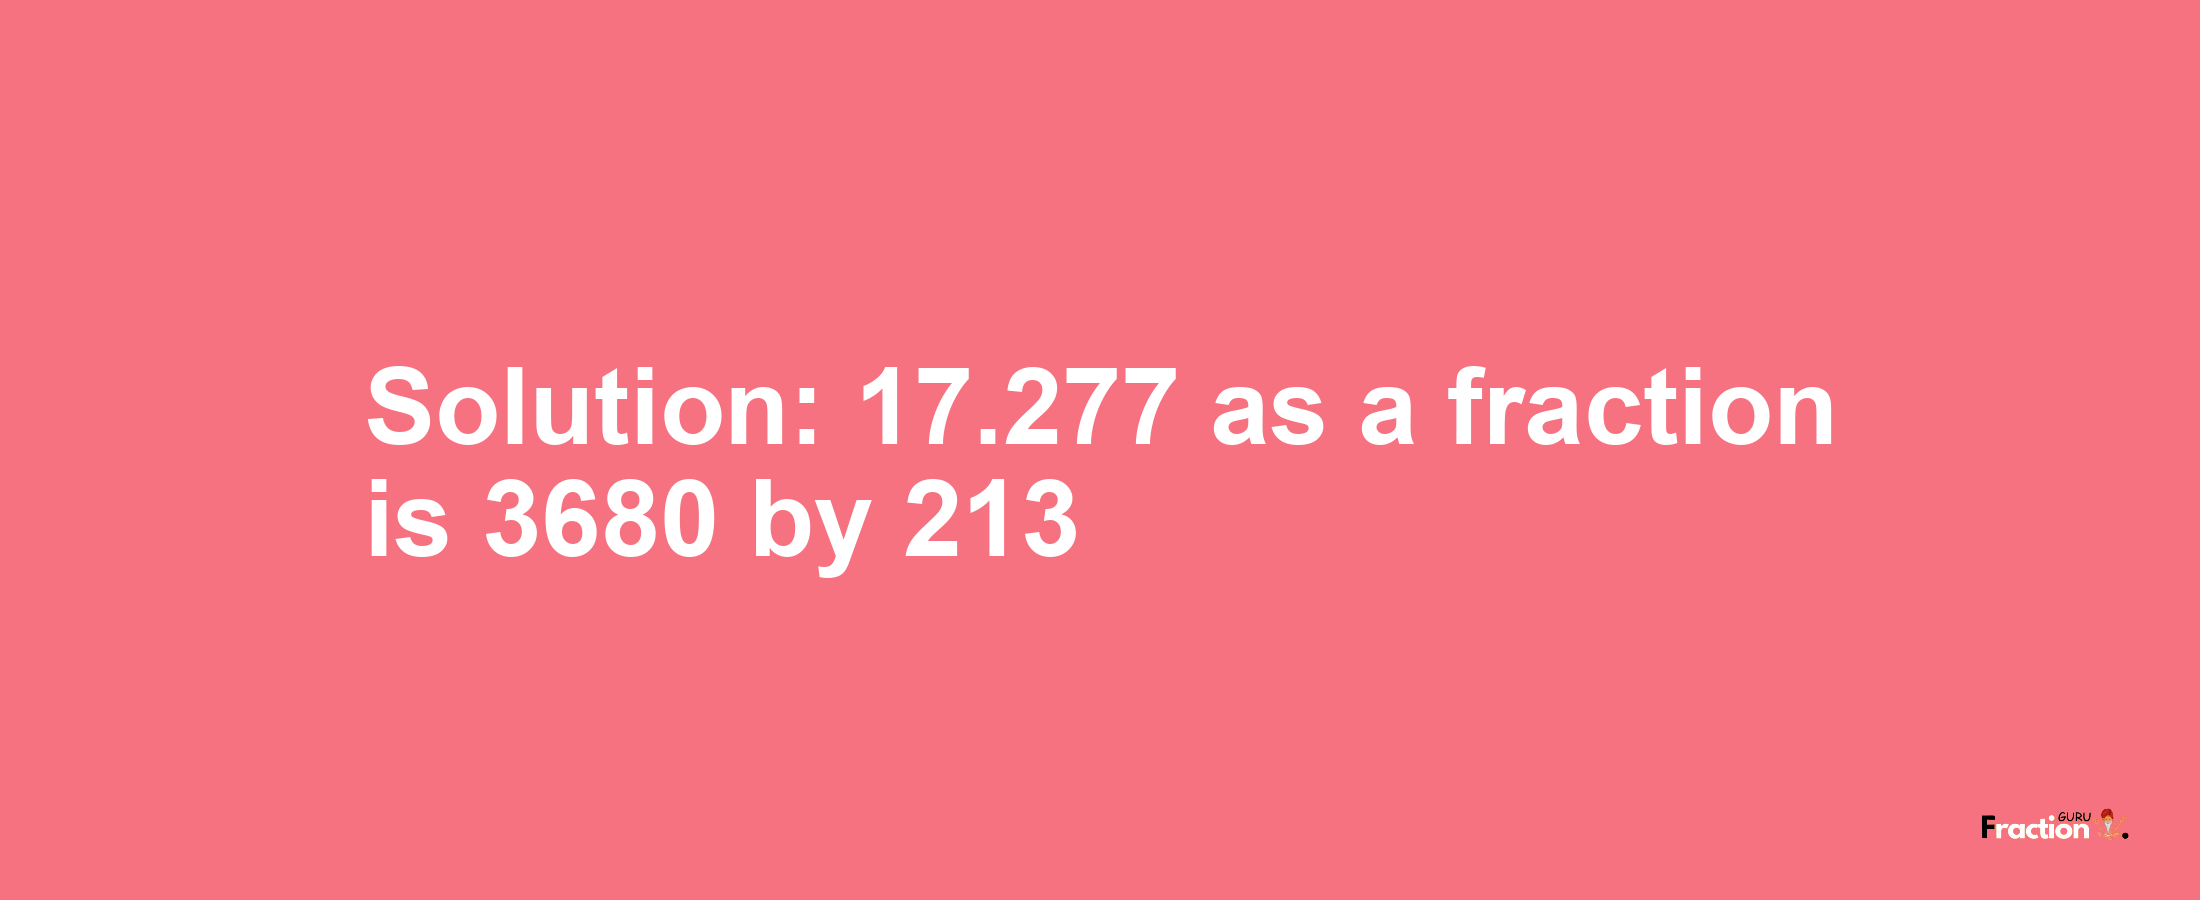 Solution:17.277 as a fraction is 3680/213